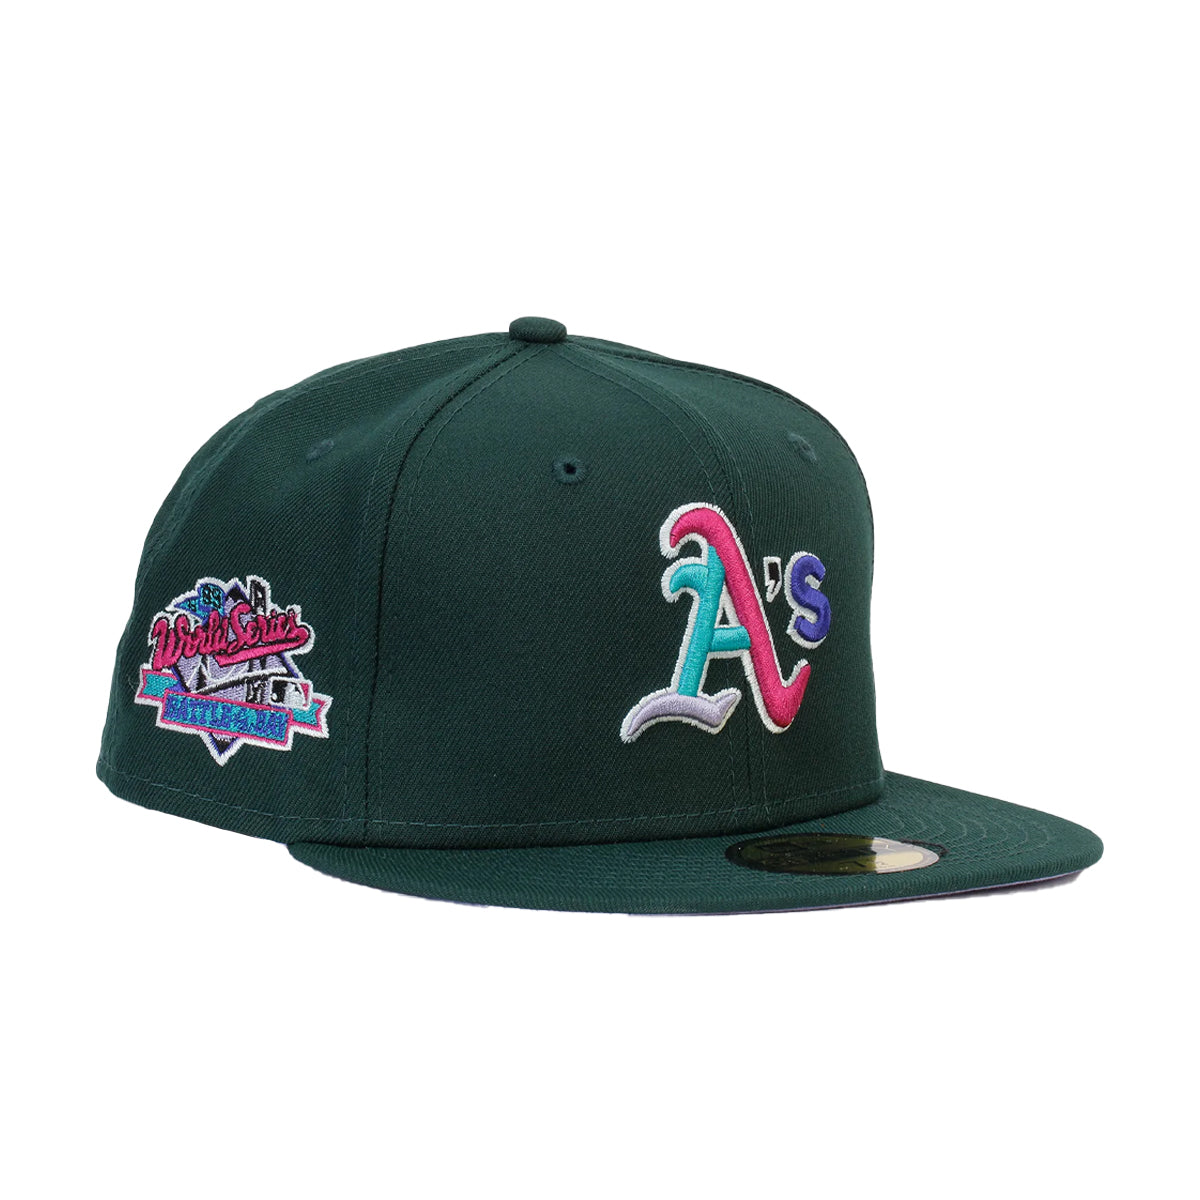 MLB August 25 59Fifty Fitted Hat Collection by MLB x New Era